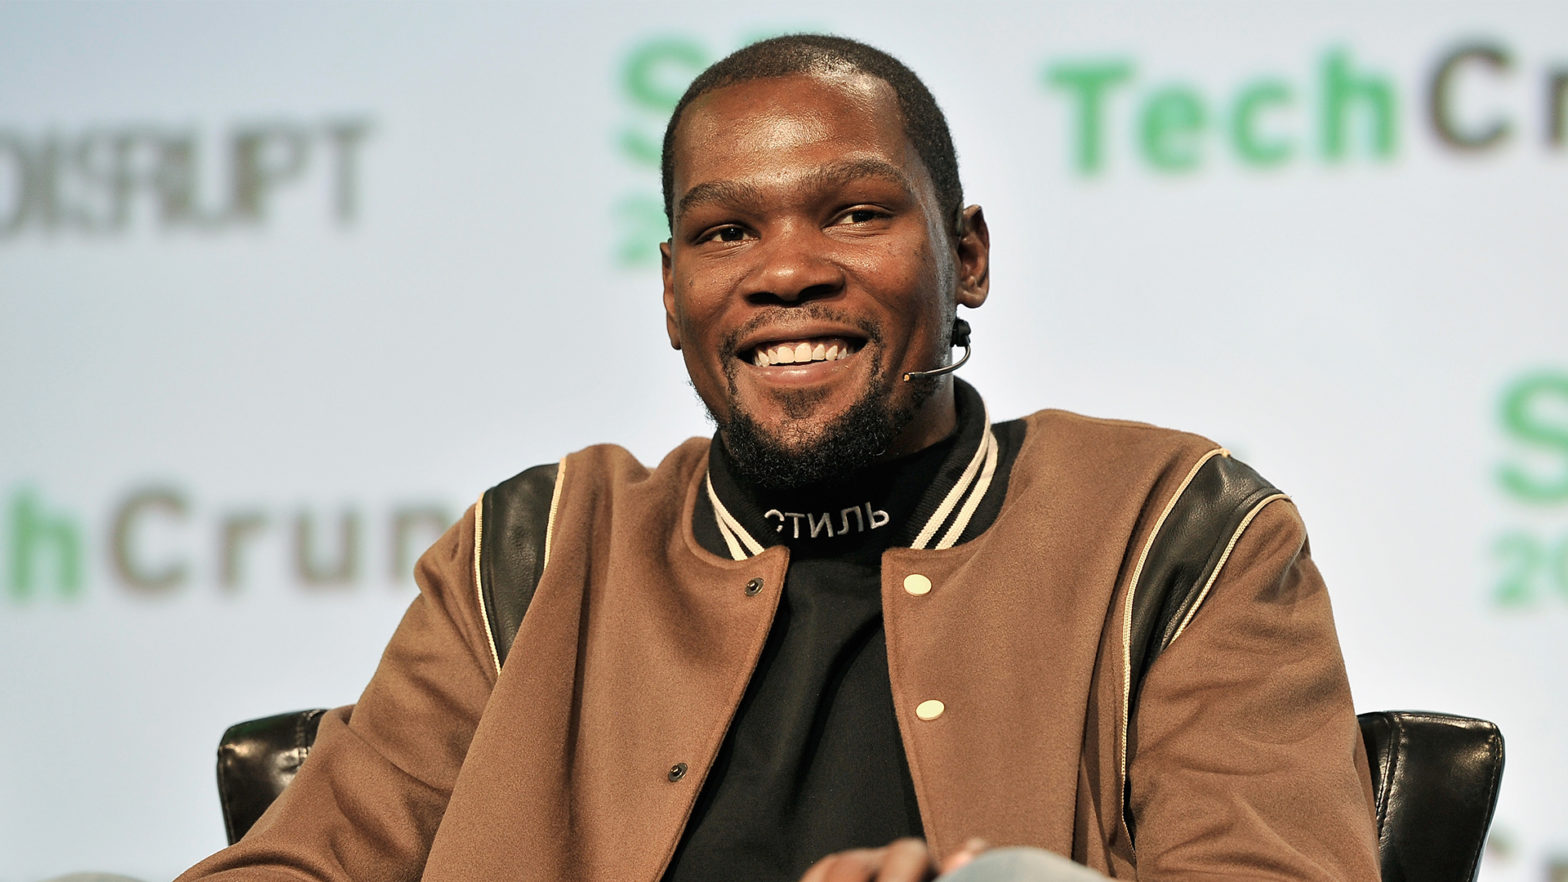 Kevin Durant Inks Deal With Weedmaps To Change The Conversation Around Cannabis For Athletes